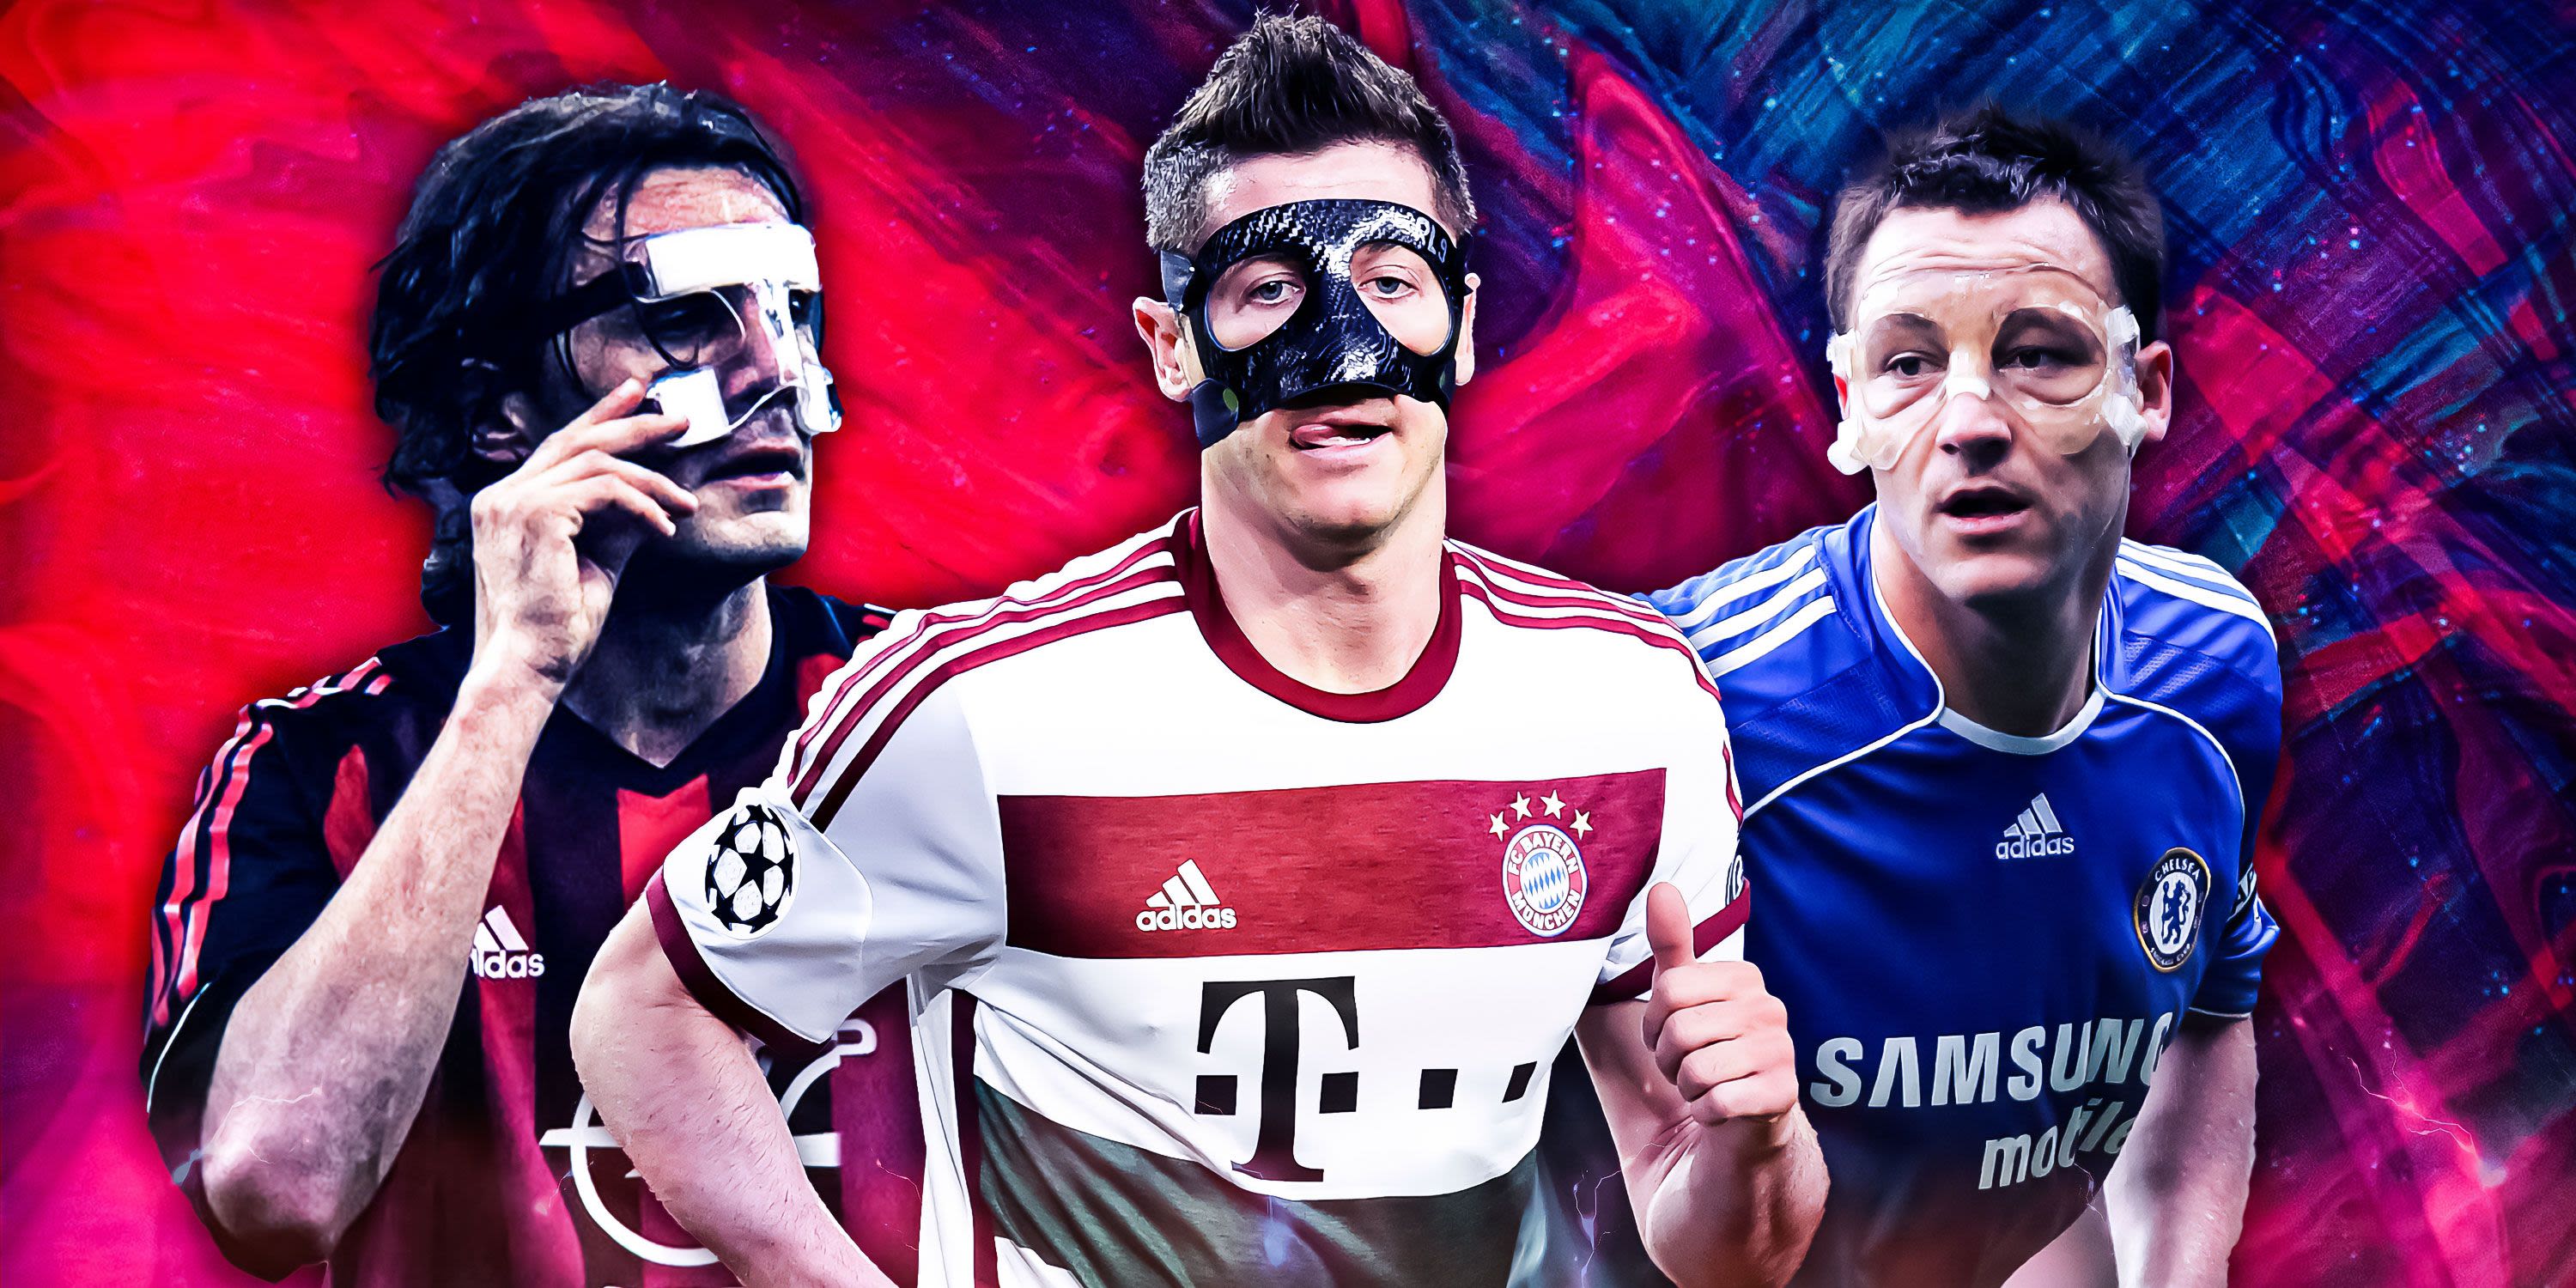 Ranking the 10 most iconic players to wear a mask in football history